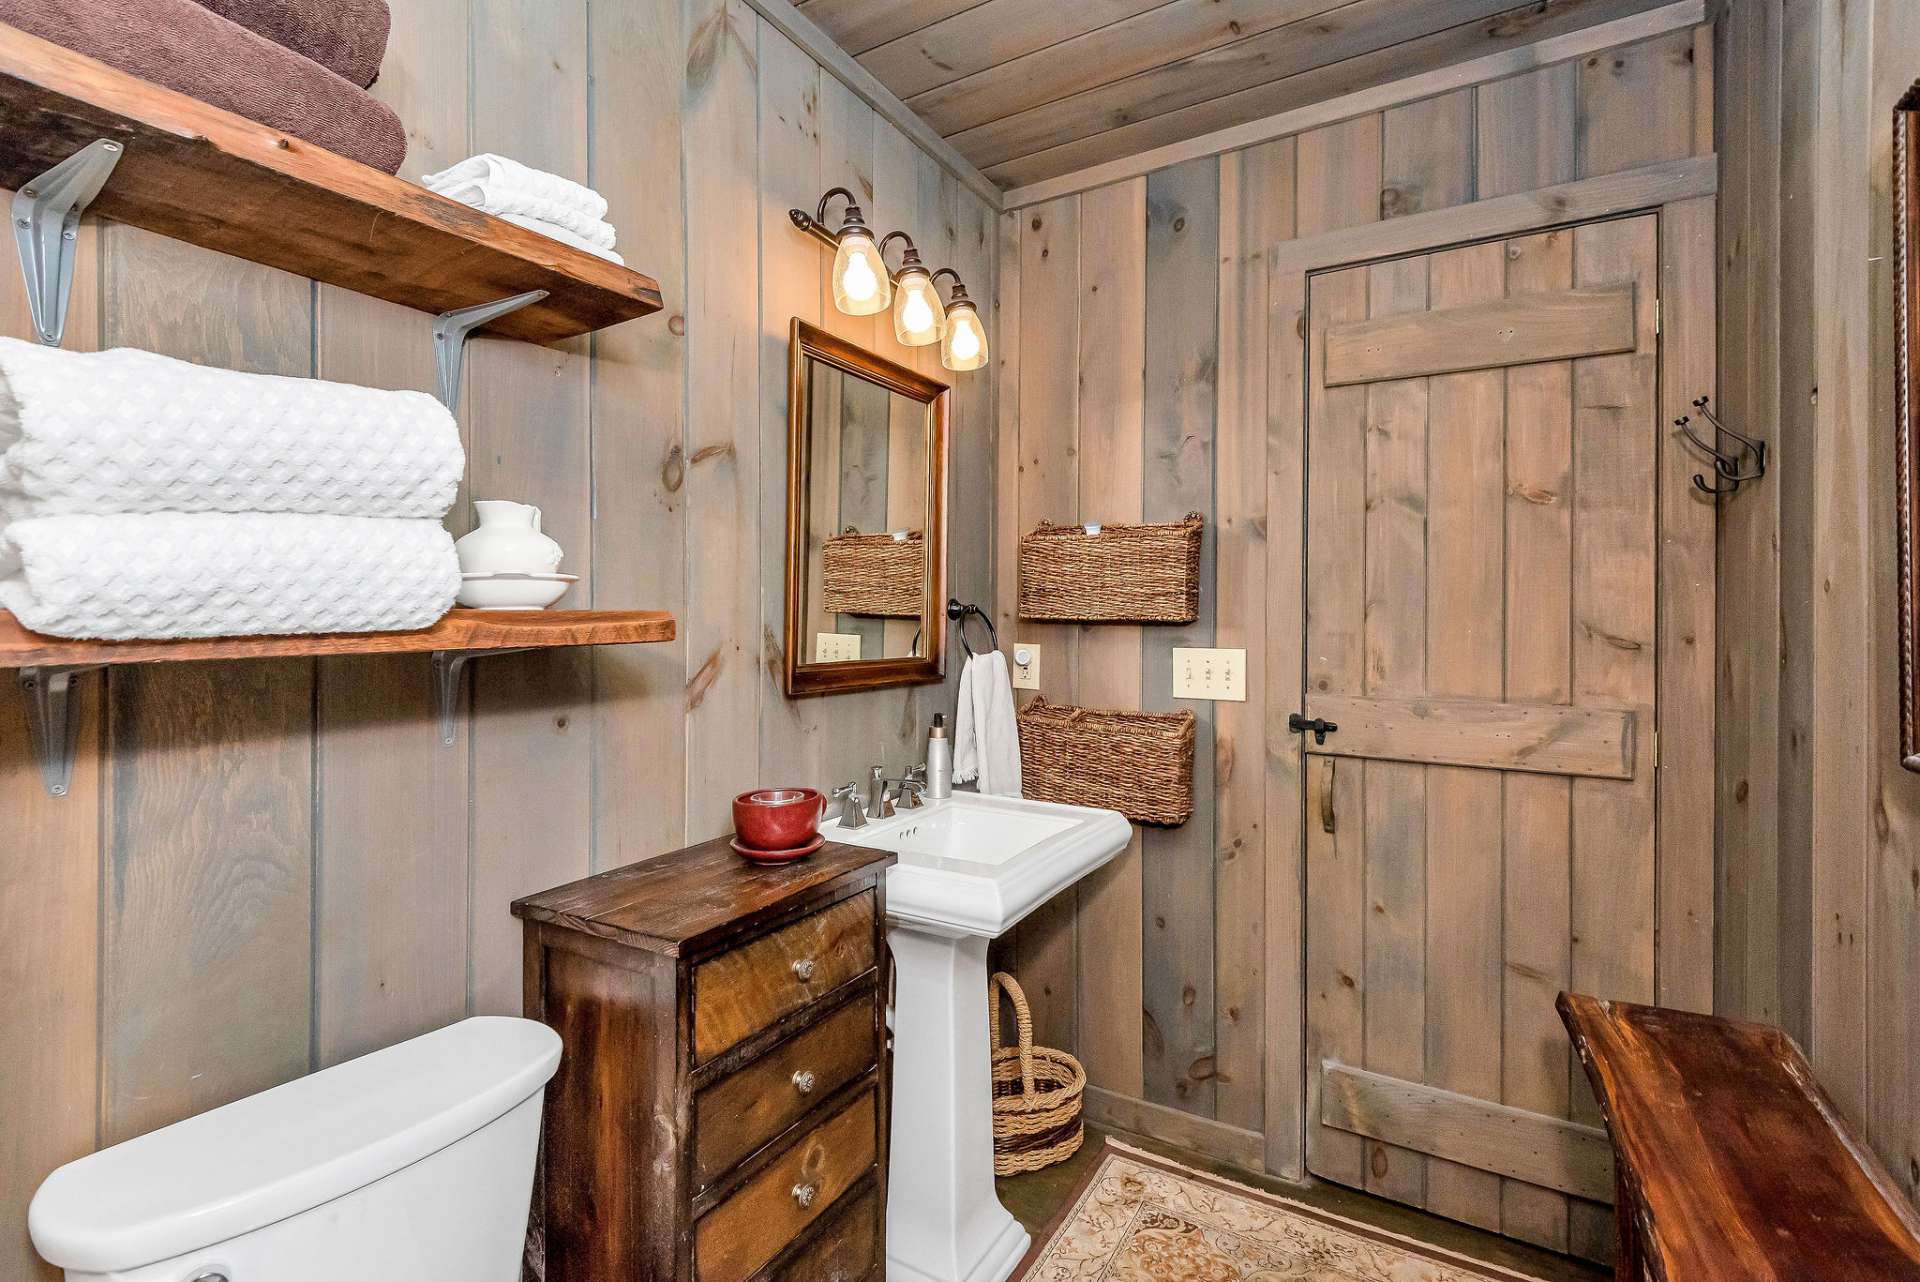 To enhance the rustic ambiance of the space, a couple of carefully selected rustic furniture pieces adorn the bathroom adding warmth and character to the room while providing some additional storage.